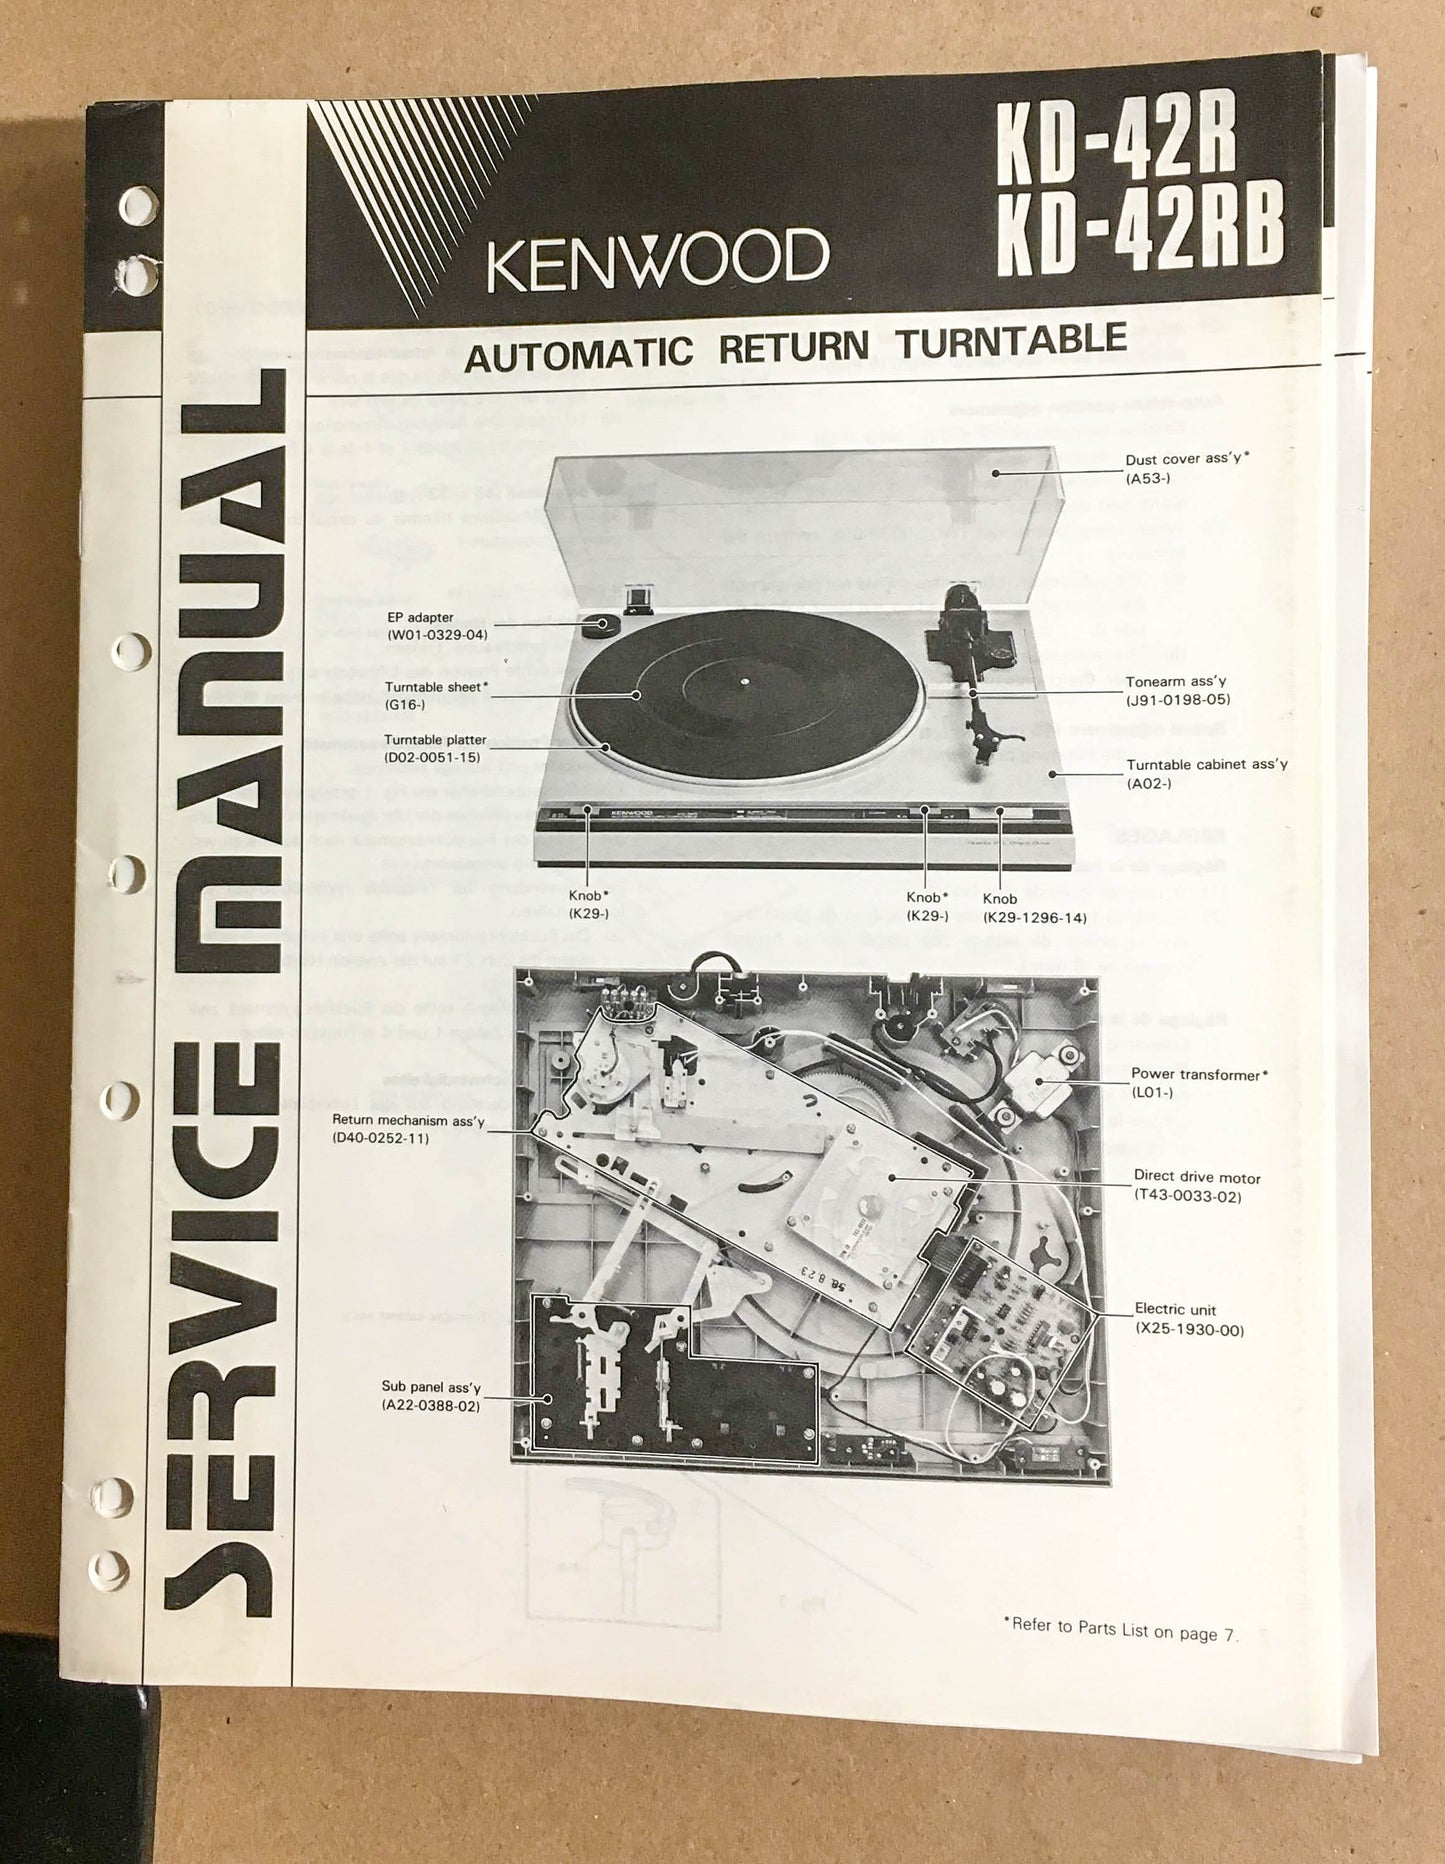 Kenwood KD-42R 42RB Turntable / Record Player  Service Manual *Original*